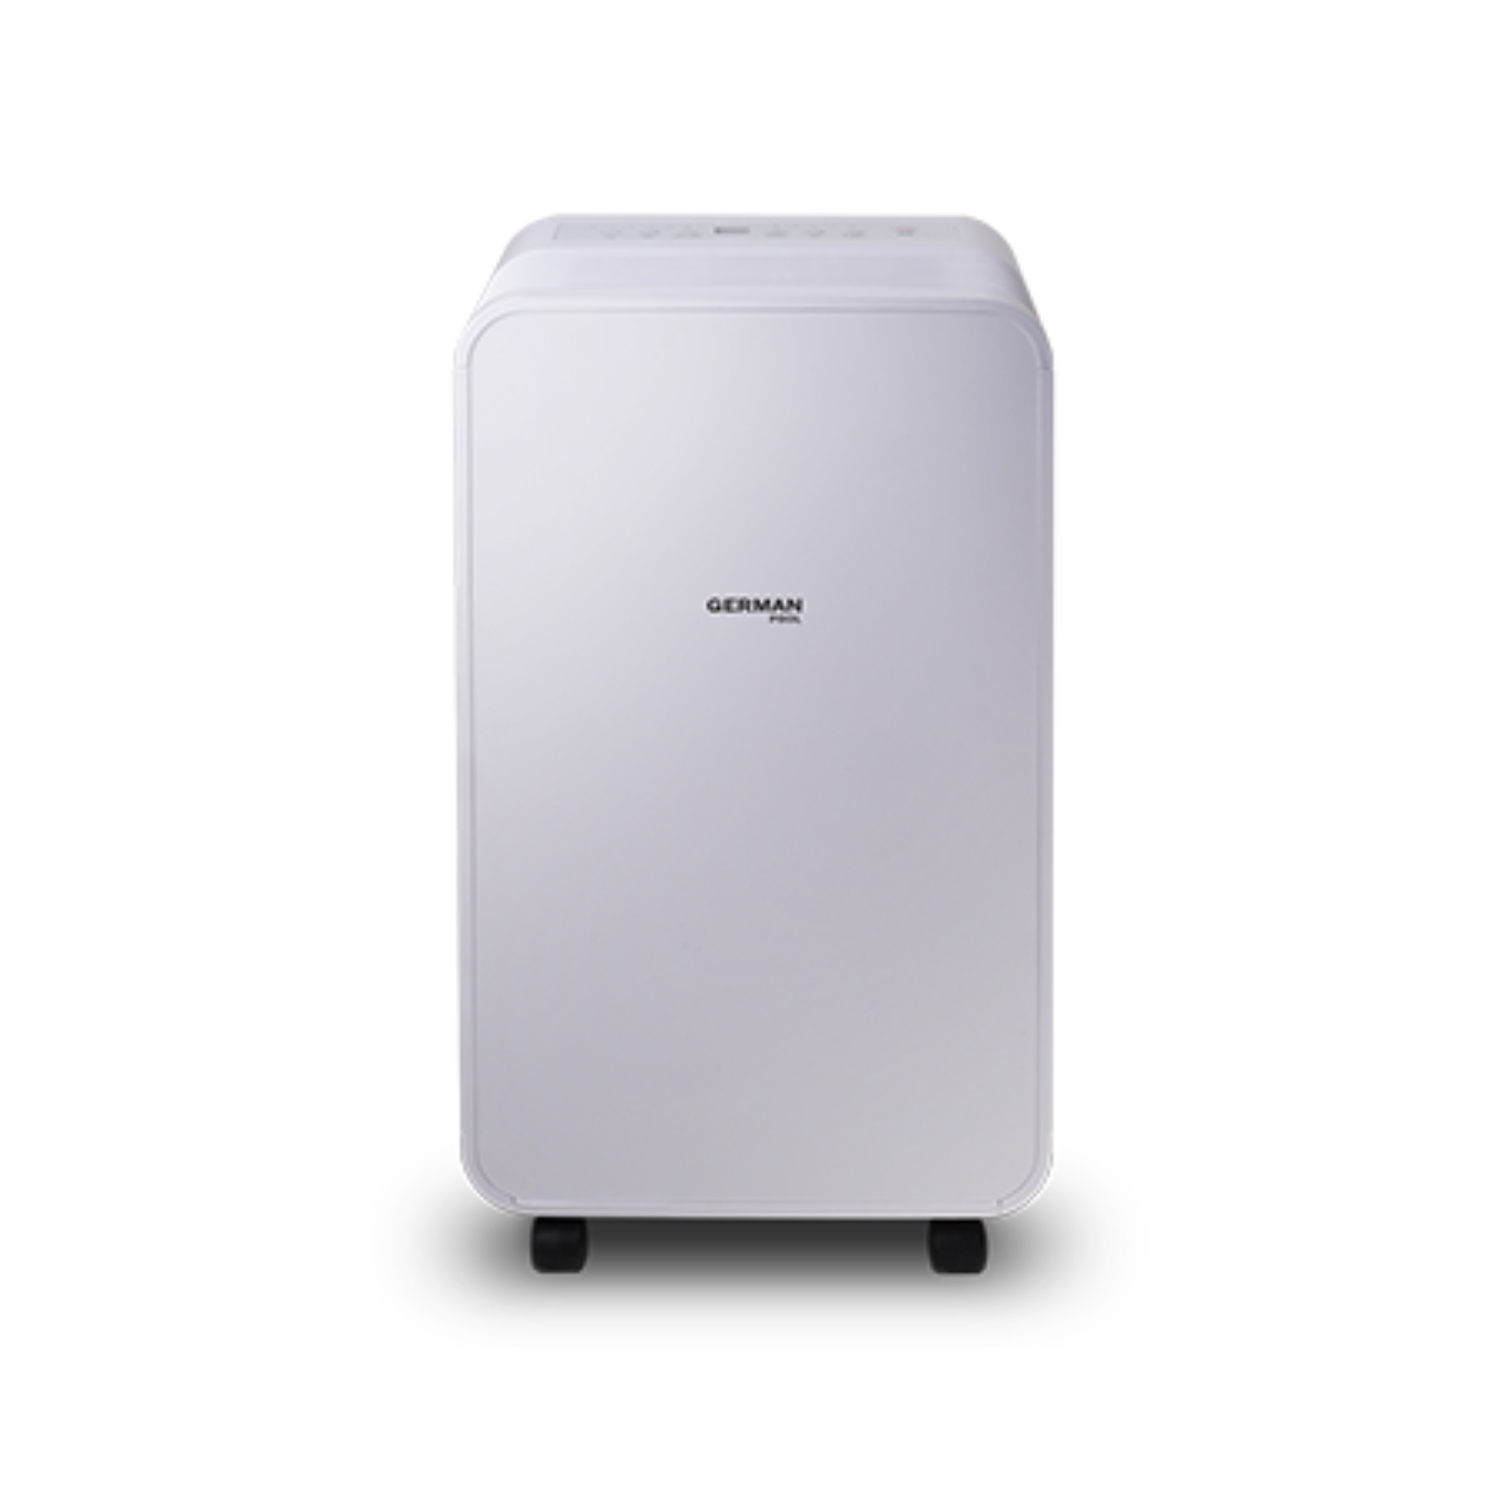 German pool WiFi Smart Air Purifying Dehumidifier (DHM-807-SC-WT), , large image number 2